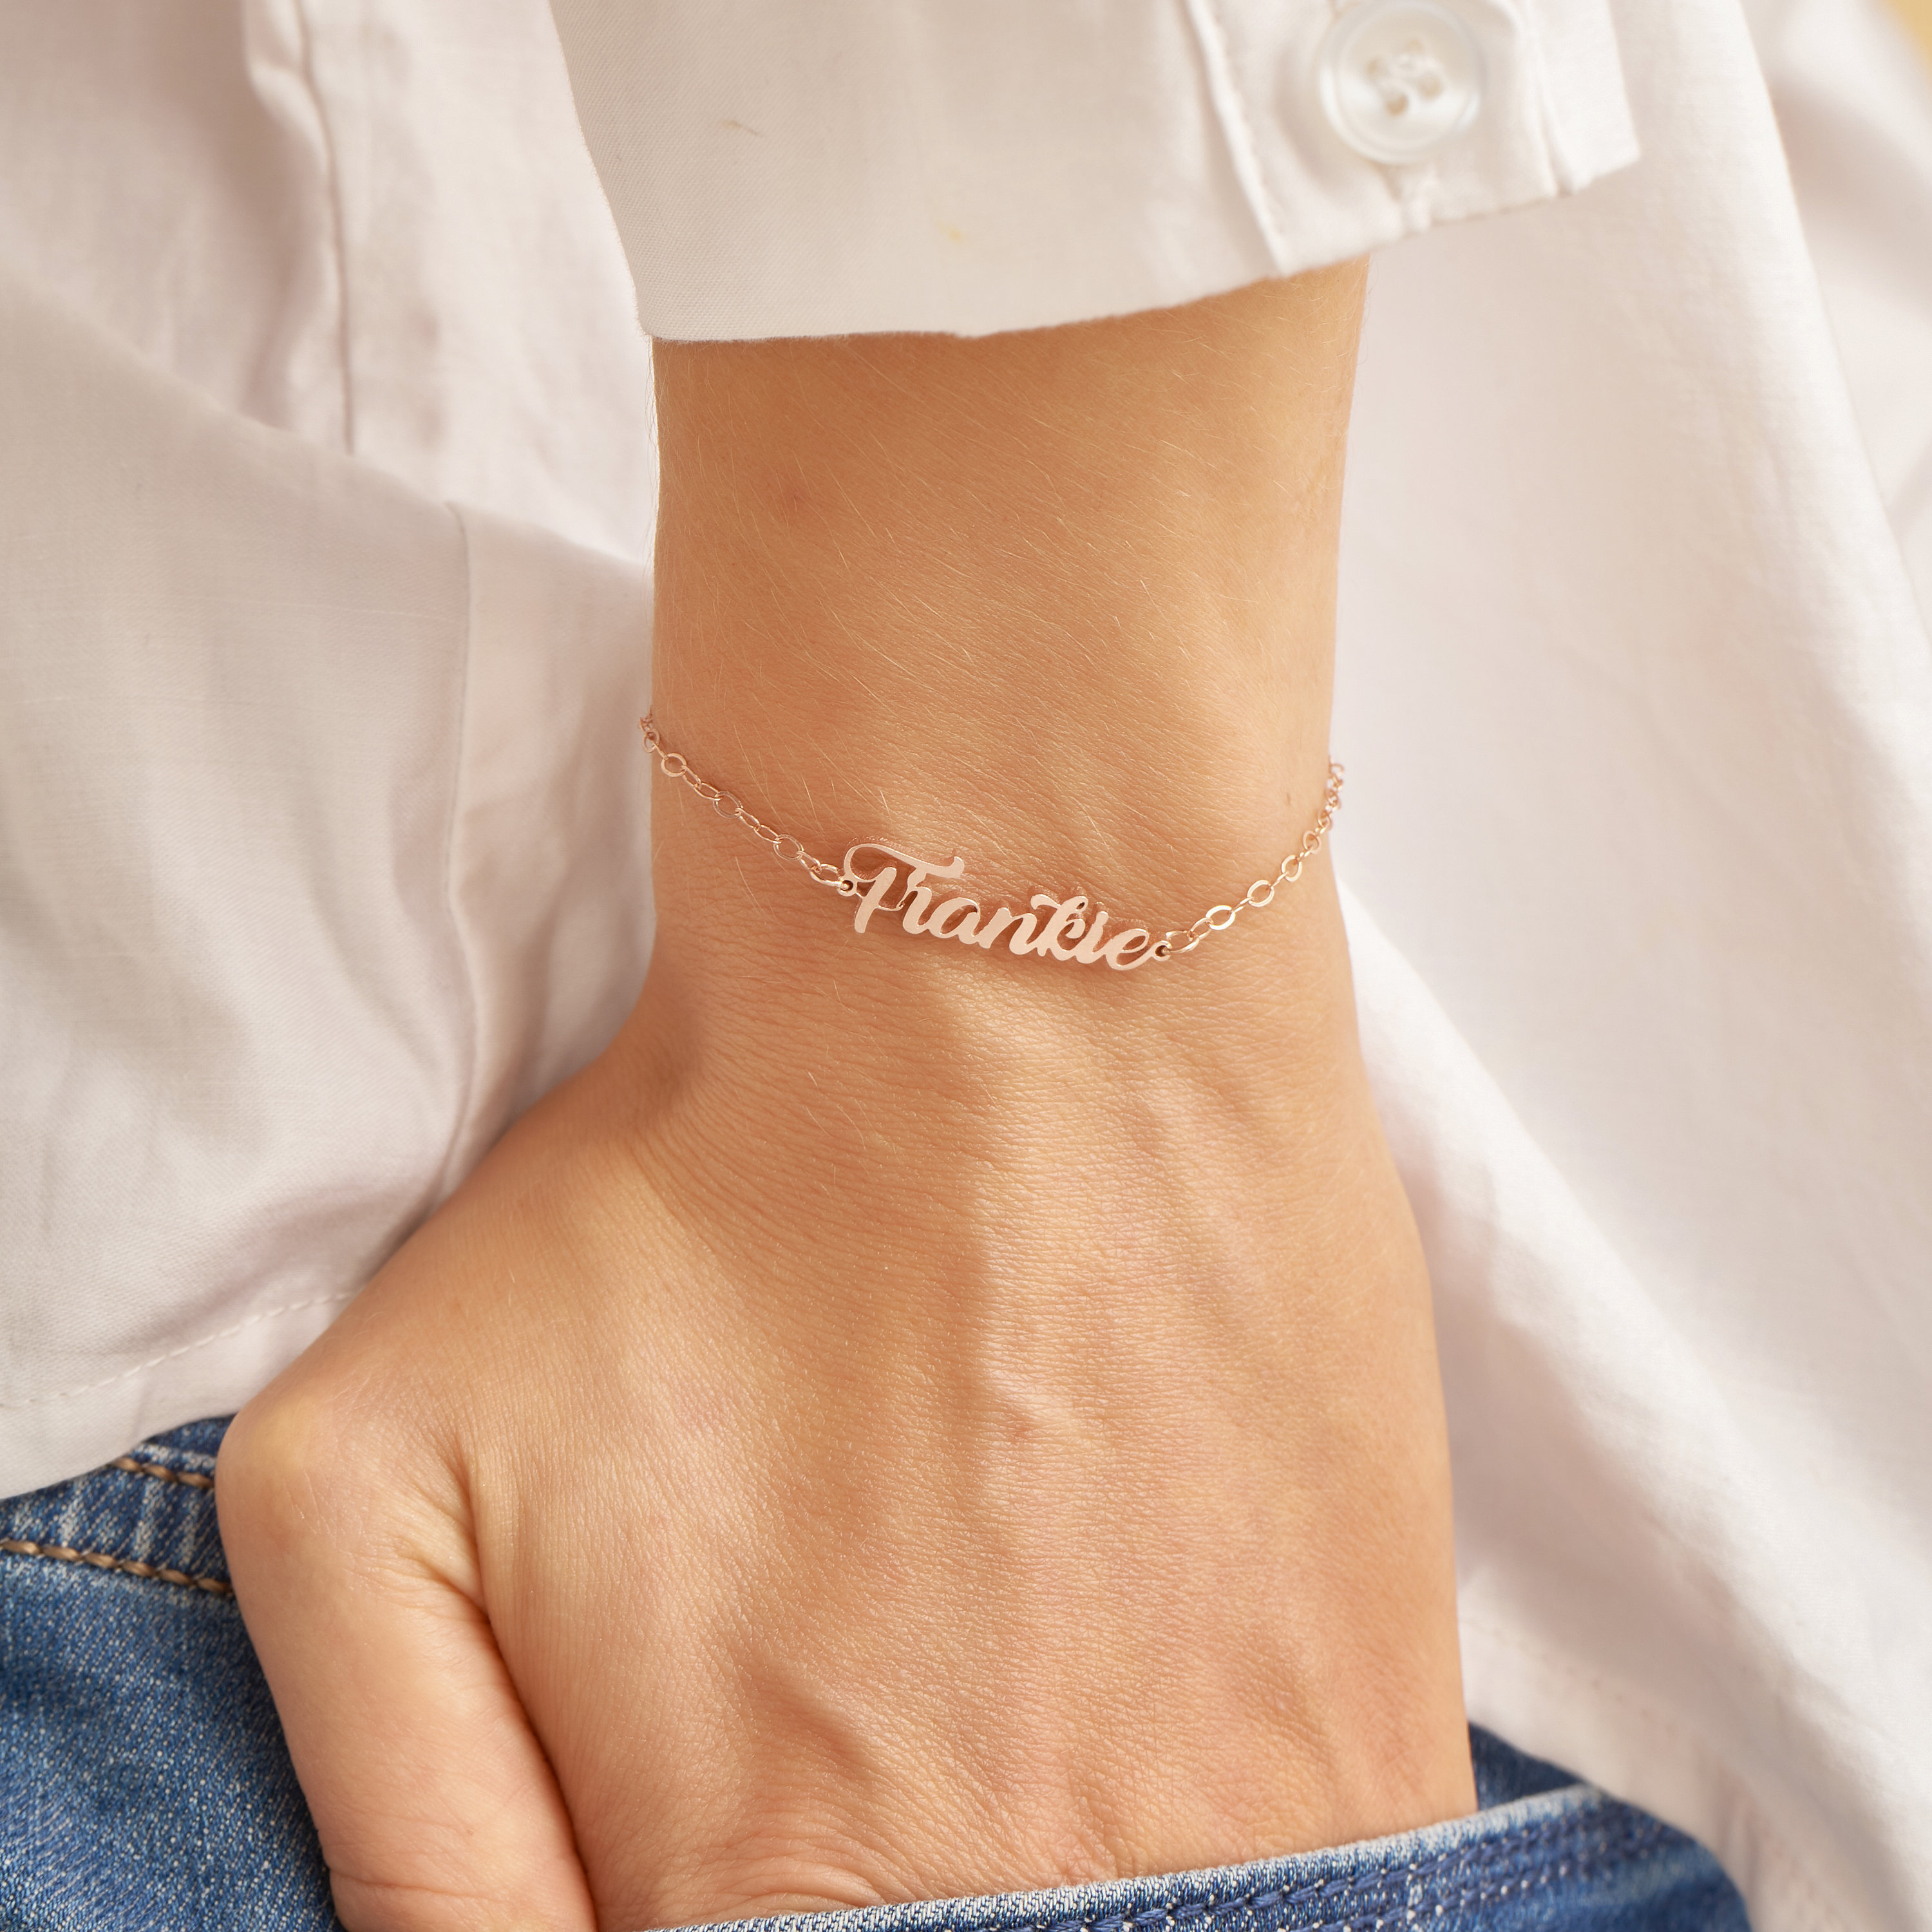 Dainty Name Bracelet Script Personalized Children's For Mom Christmas Gift Her Bh08F84